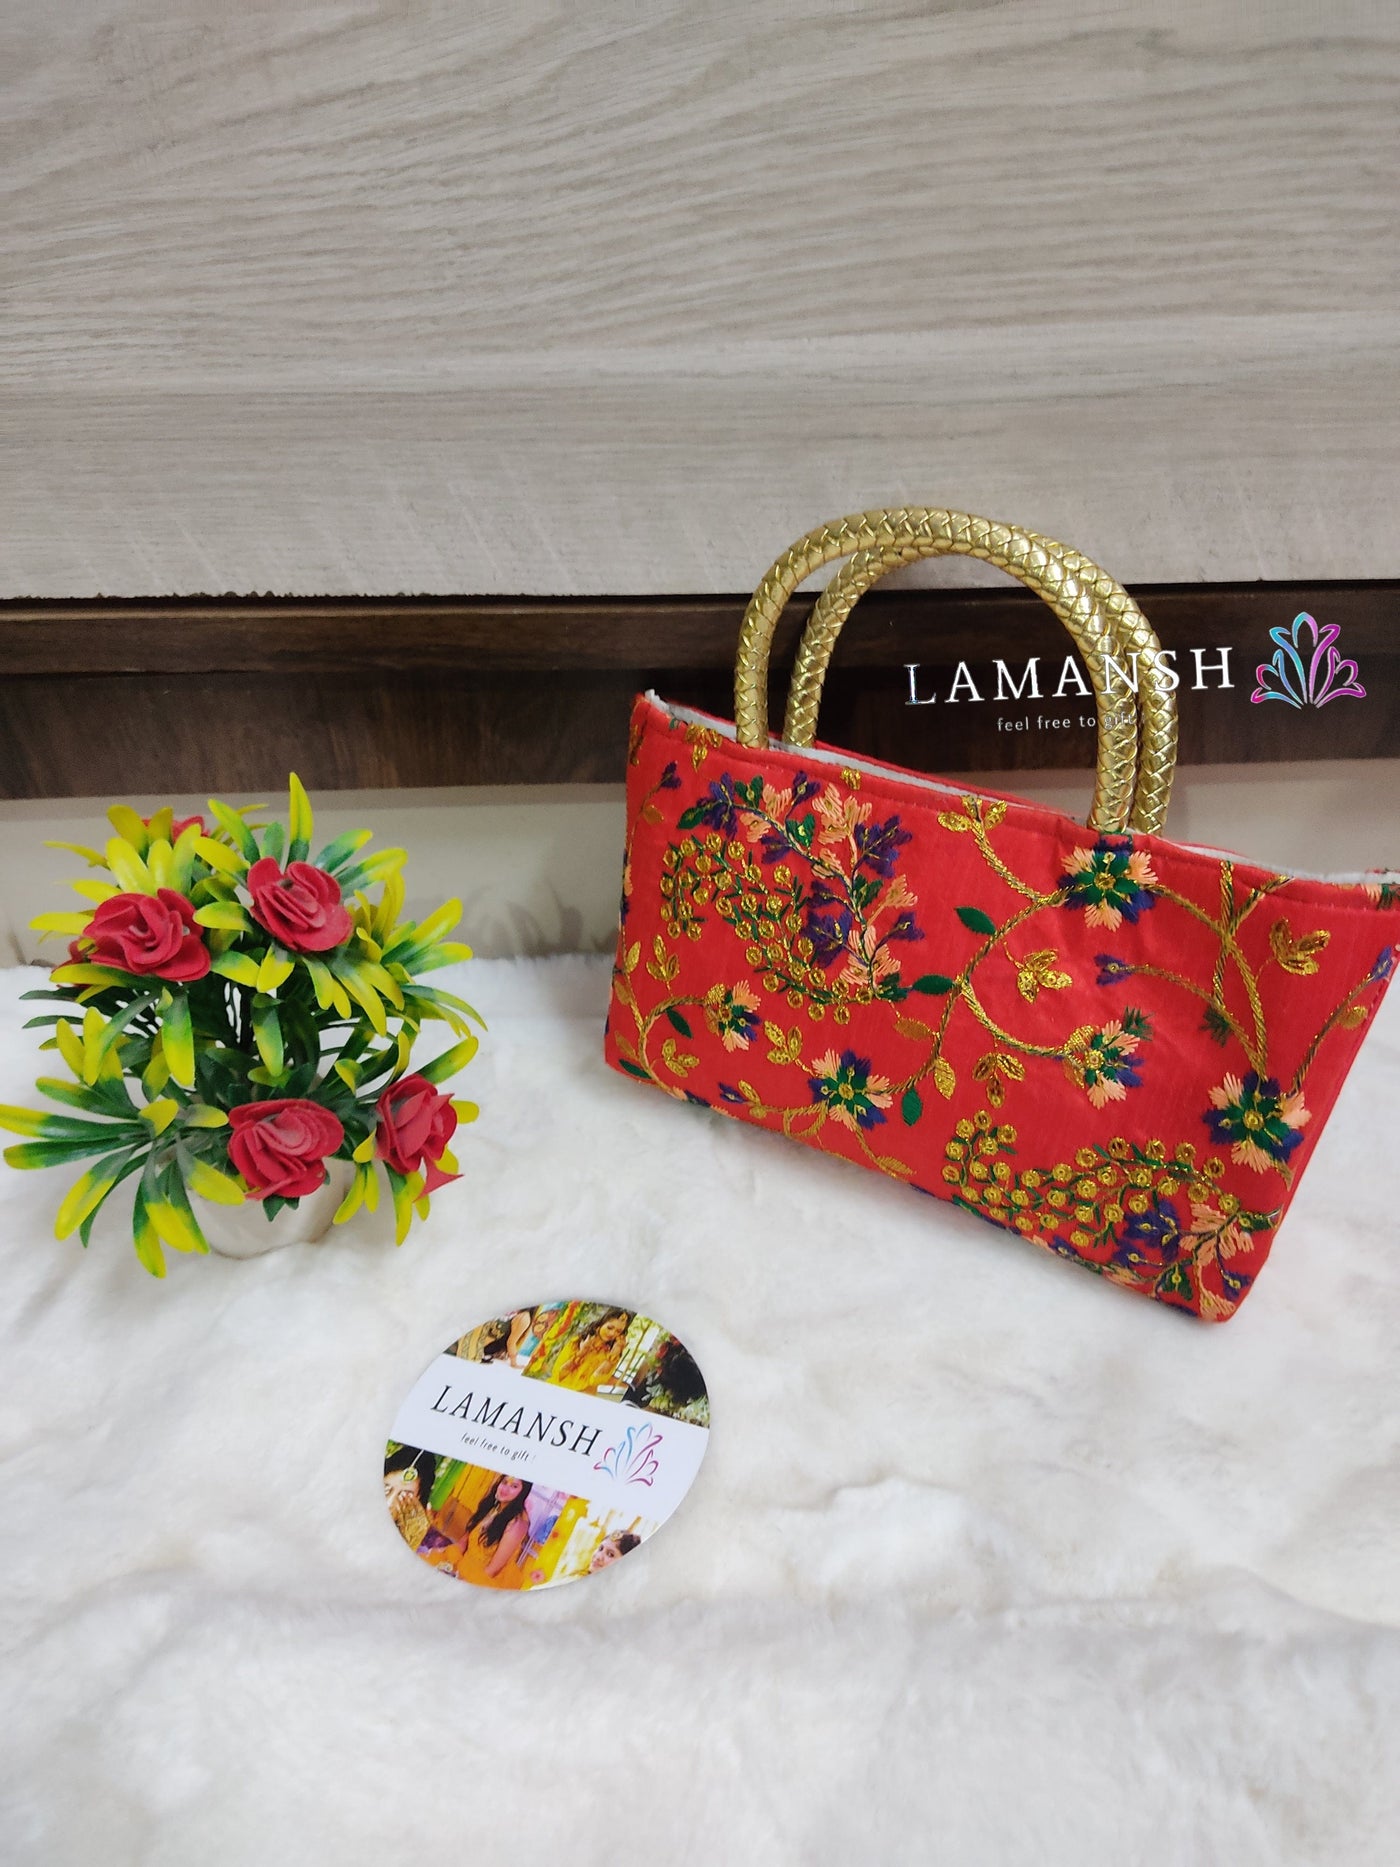 LAMANSH ® hand bags LAMANSH® Embroidered Hand Stitched Hand Bag for Weddings & Party's (6 colors options ✨)